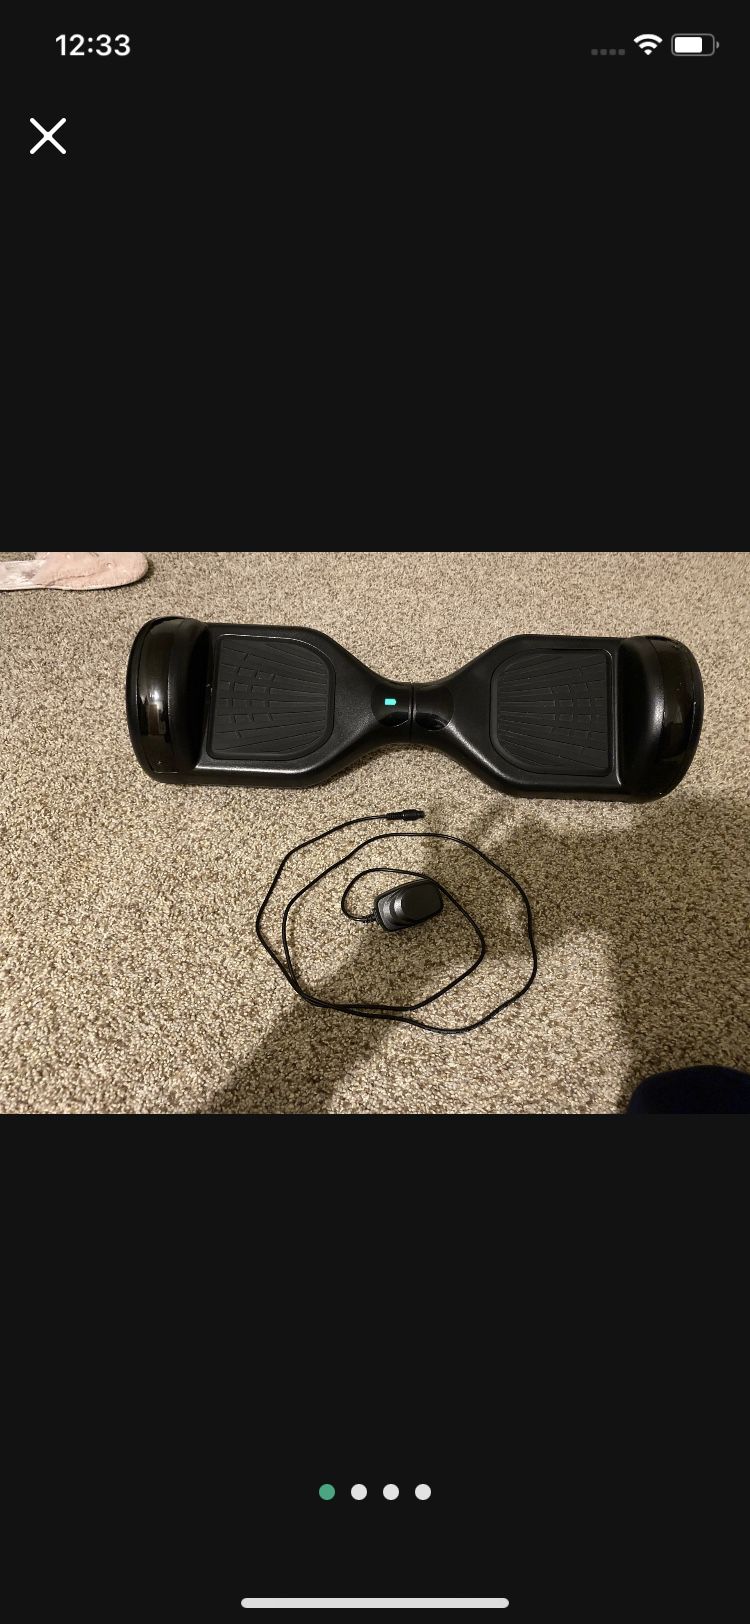 Hoverboard With Rainbow Lights [Charger Included]